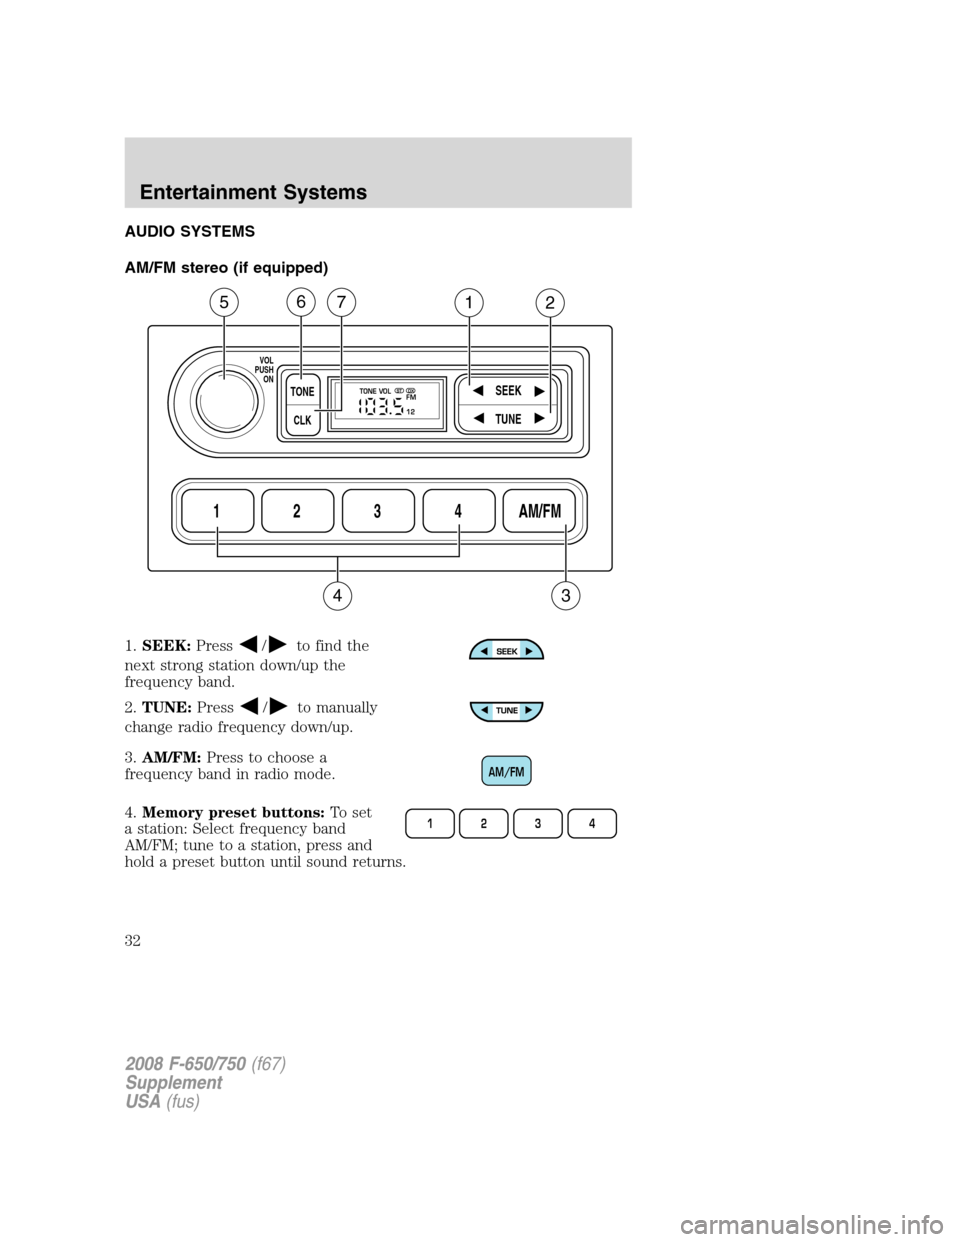 FORD F750 2008 11.G Owners Manual AUDIO SYSTEMS
AM/FM stereo (if equipped)
1.SEEK:Press
/to find the
next strong station down/up the
frequency band.
2.TUNE:Press
/to manually
change radio frequency down/up.
3.AM/FM:Press to choose a
f